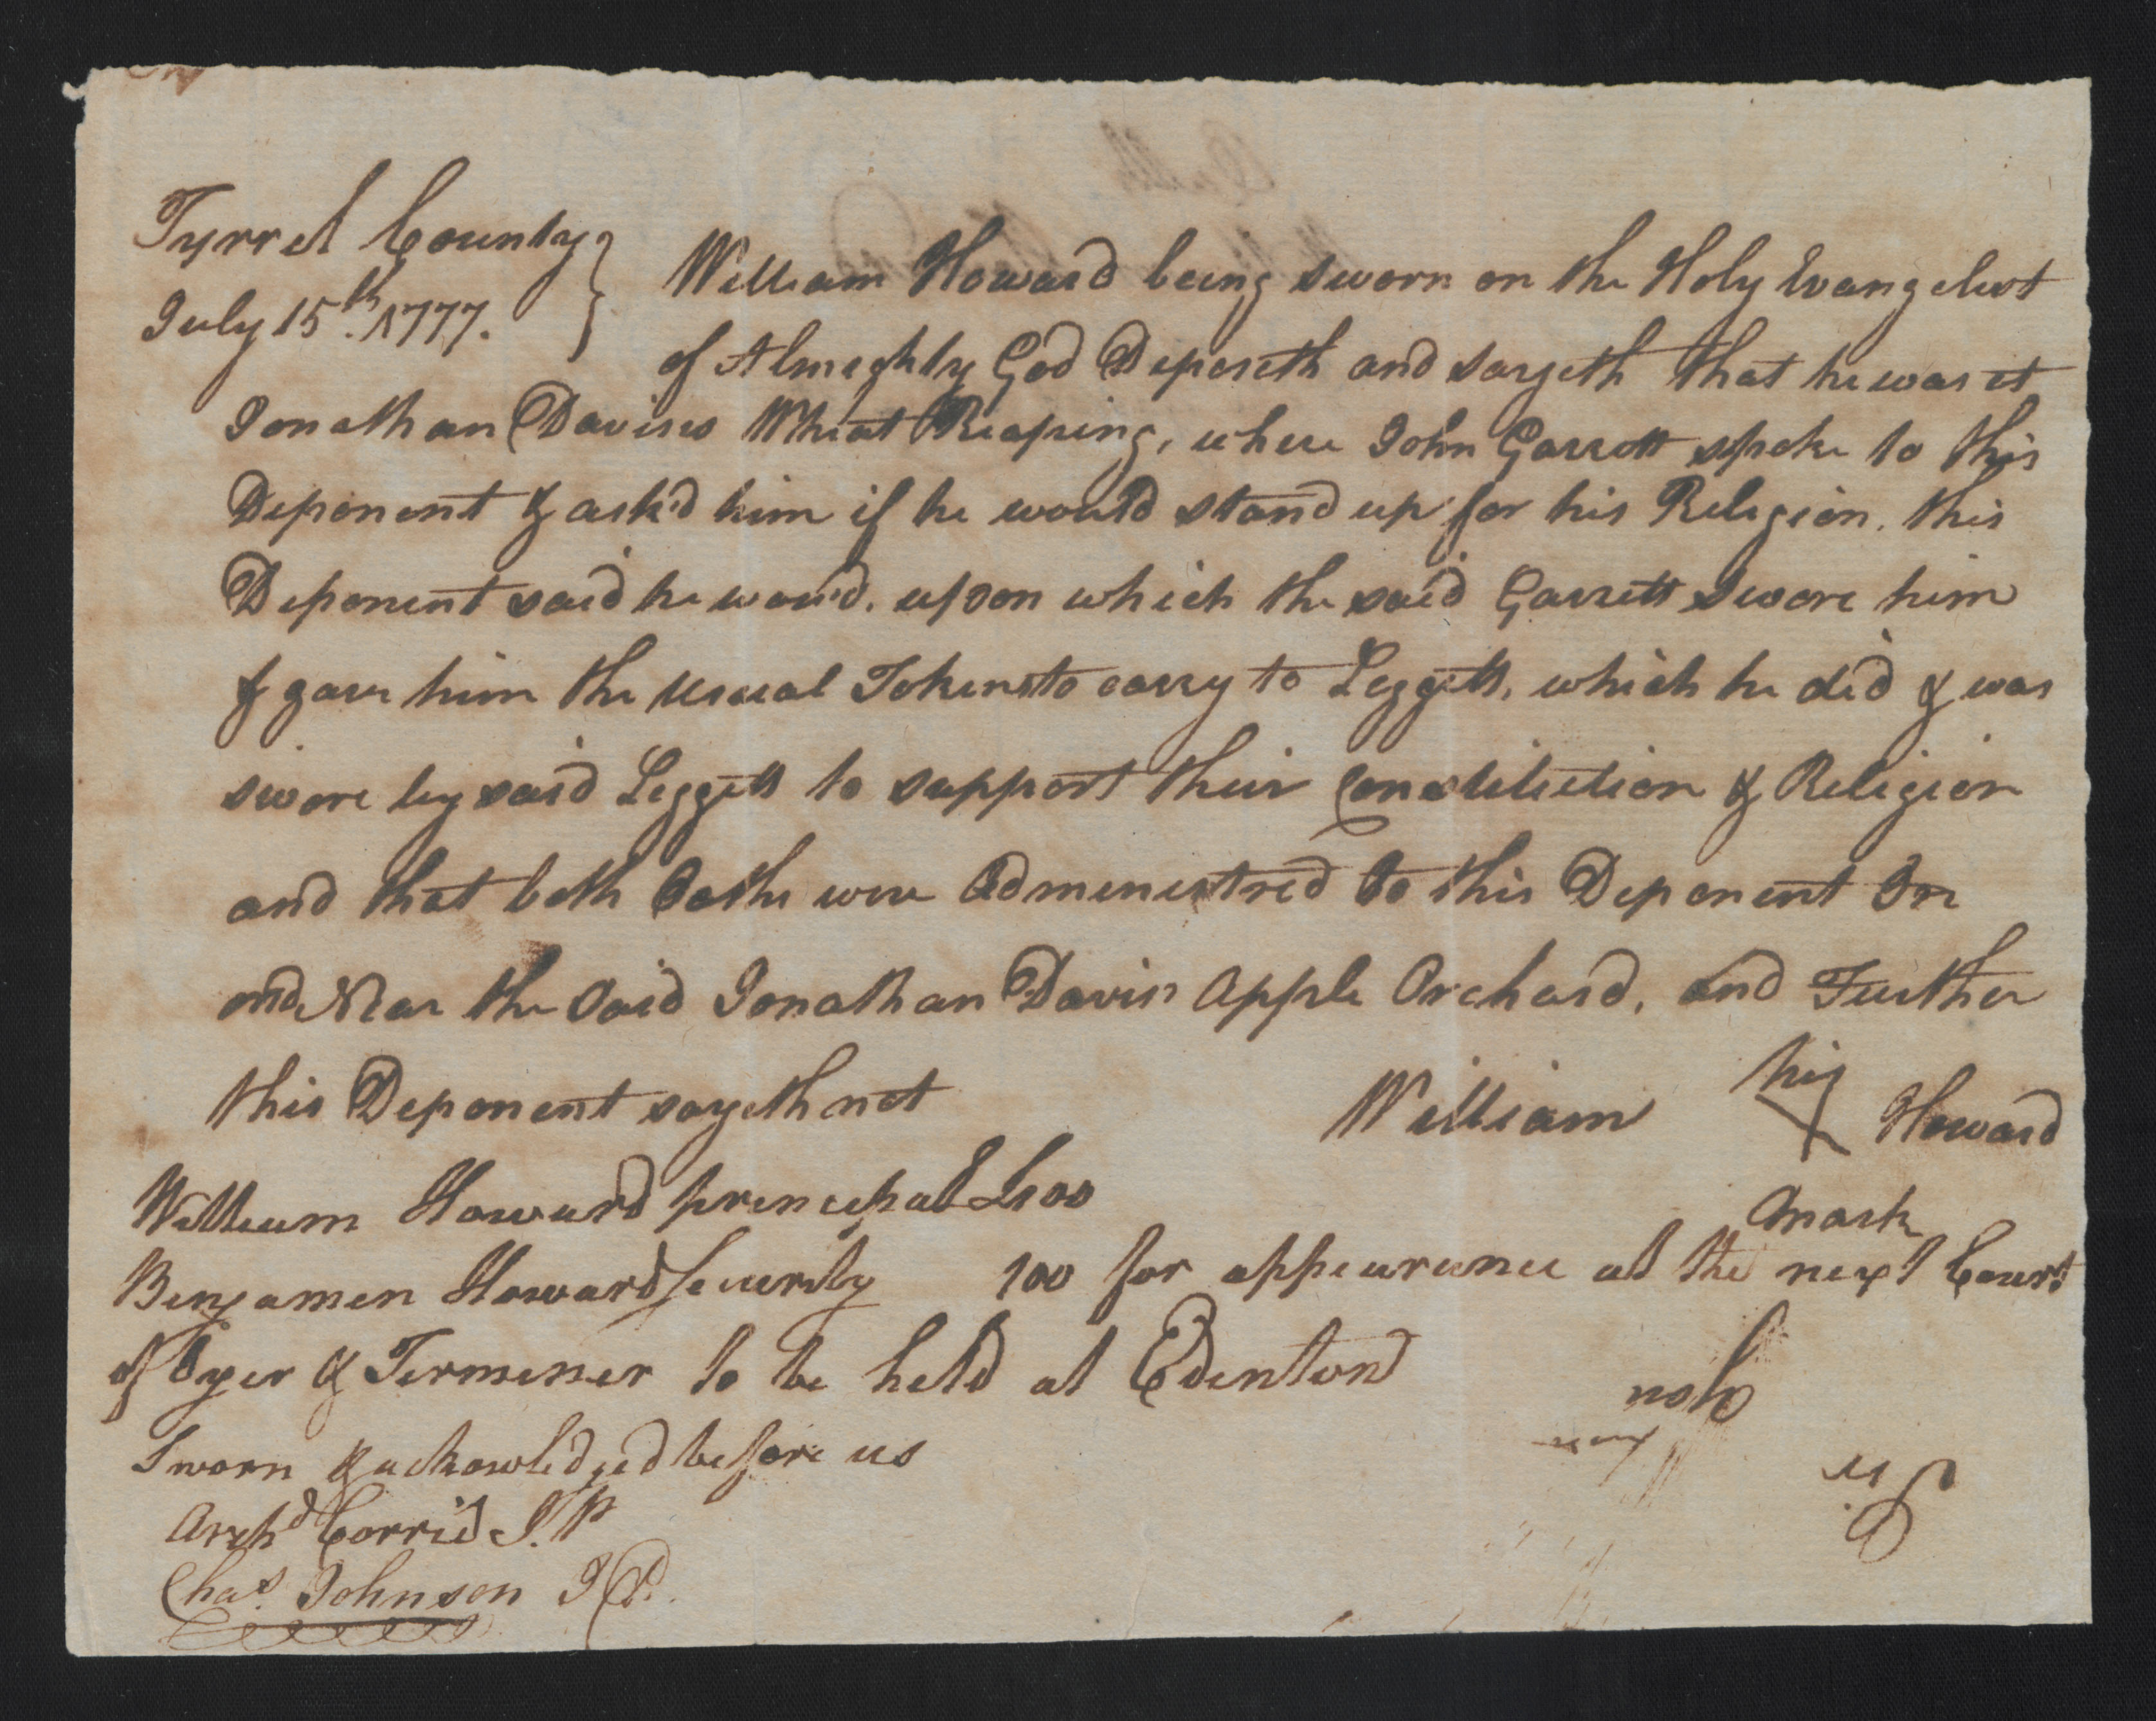 Deposition of William Howard, dated 15 July 1777